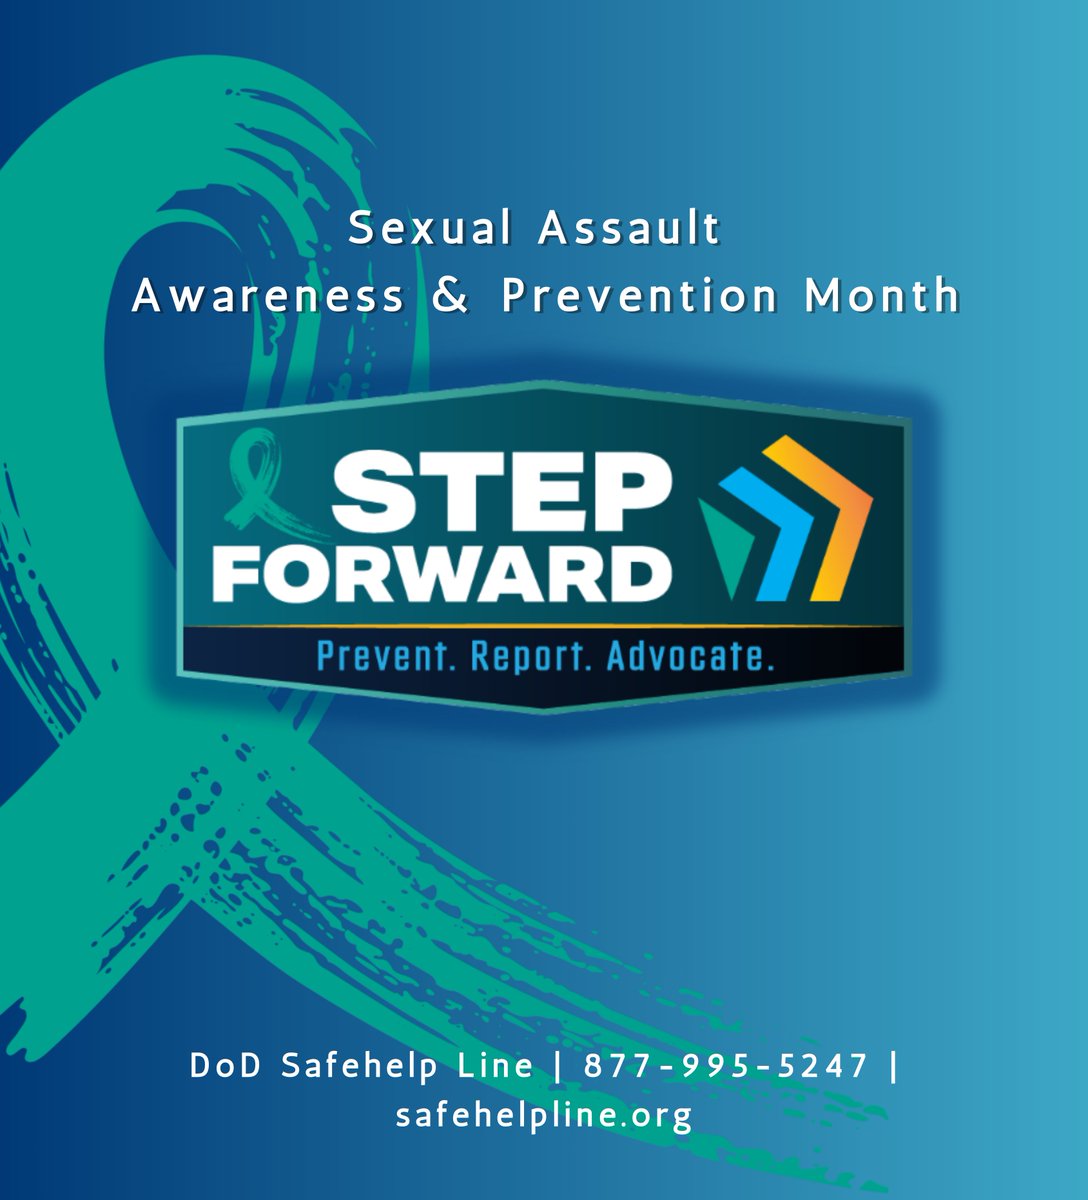 April is National Sexual Assault Awareness and Prevention Month and the theme is 'STEP FORWARD. Prevent. Report. Advocate.' The goal is to raise public awareness about sexual harassment and assault, offer support to those affected, and increase knowledge to prevent it.